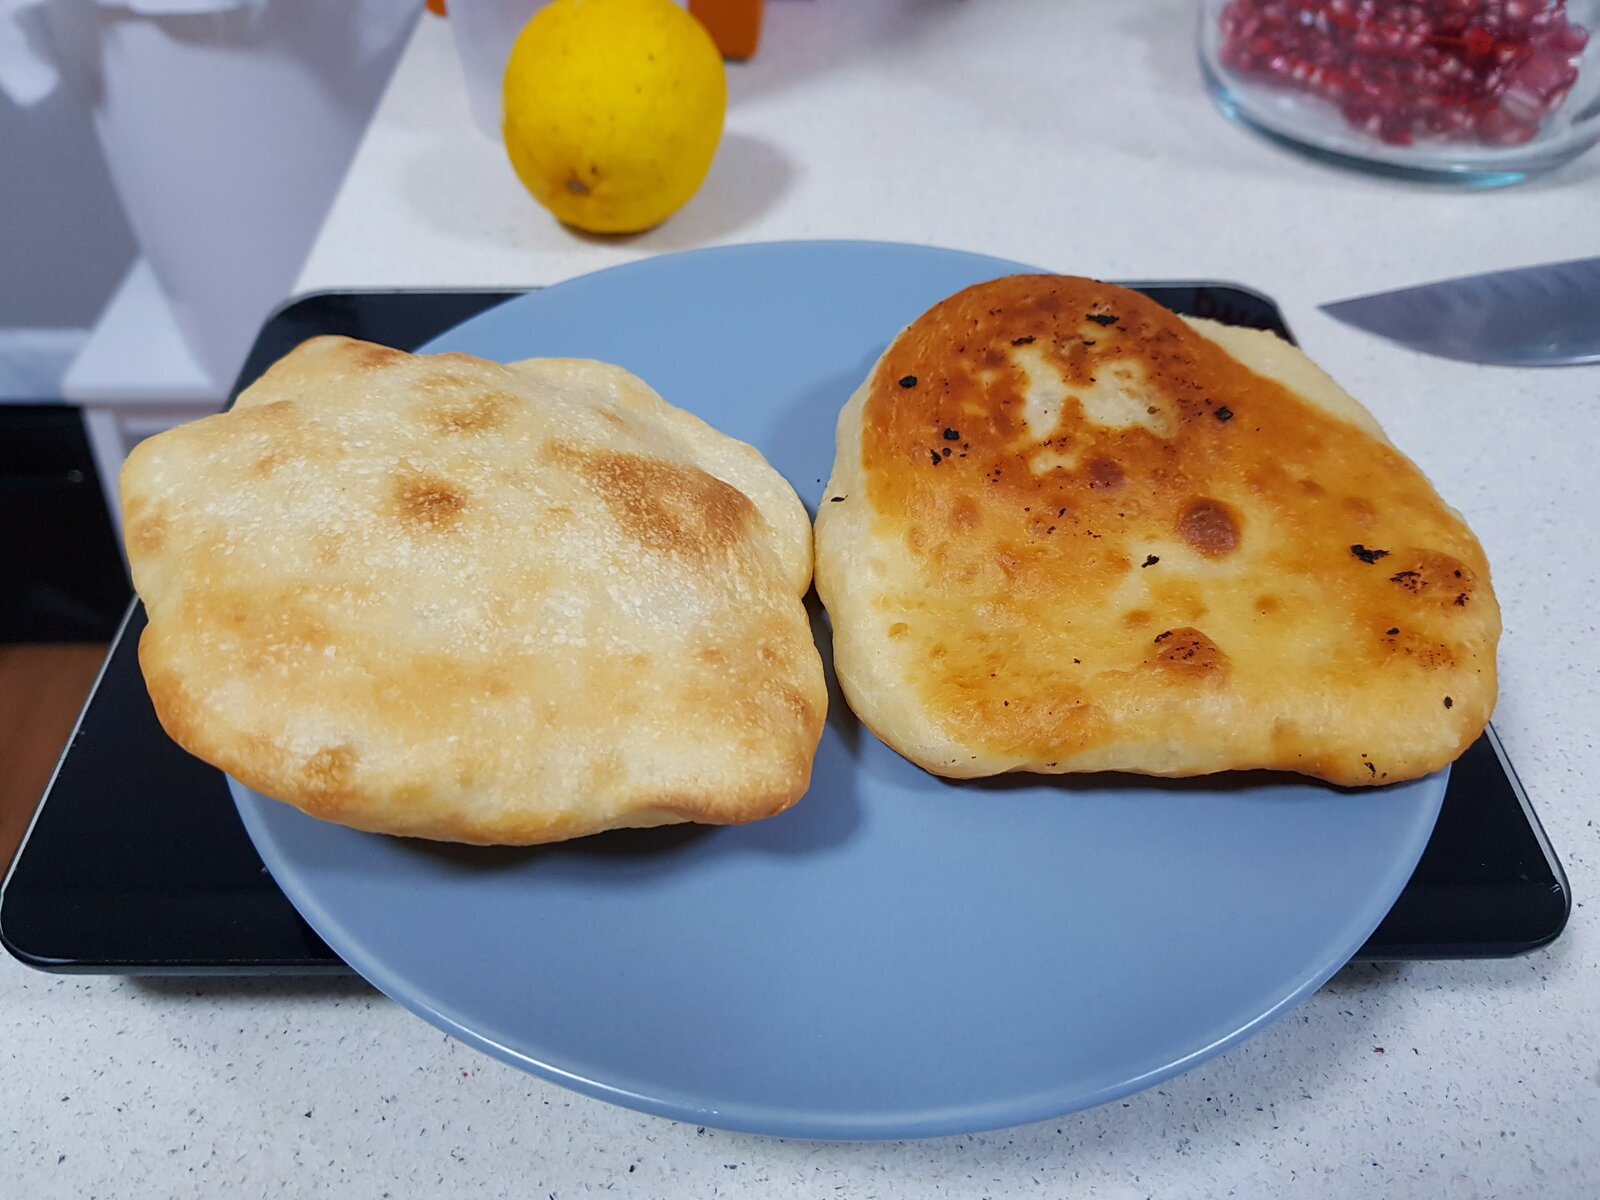 Bhatura (in air fryer on left, shallow fried on right)